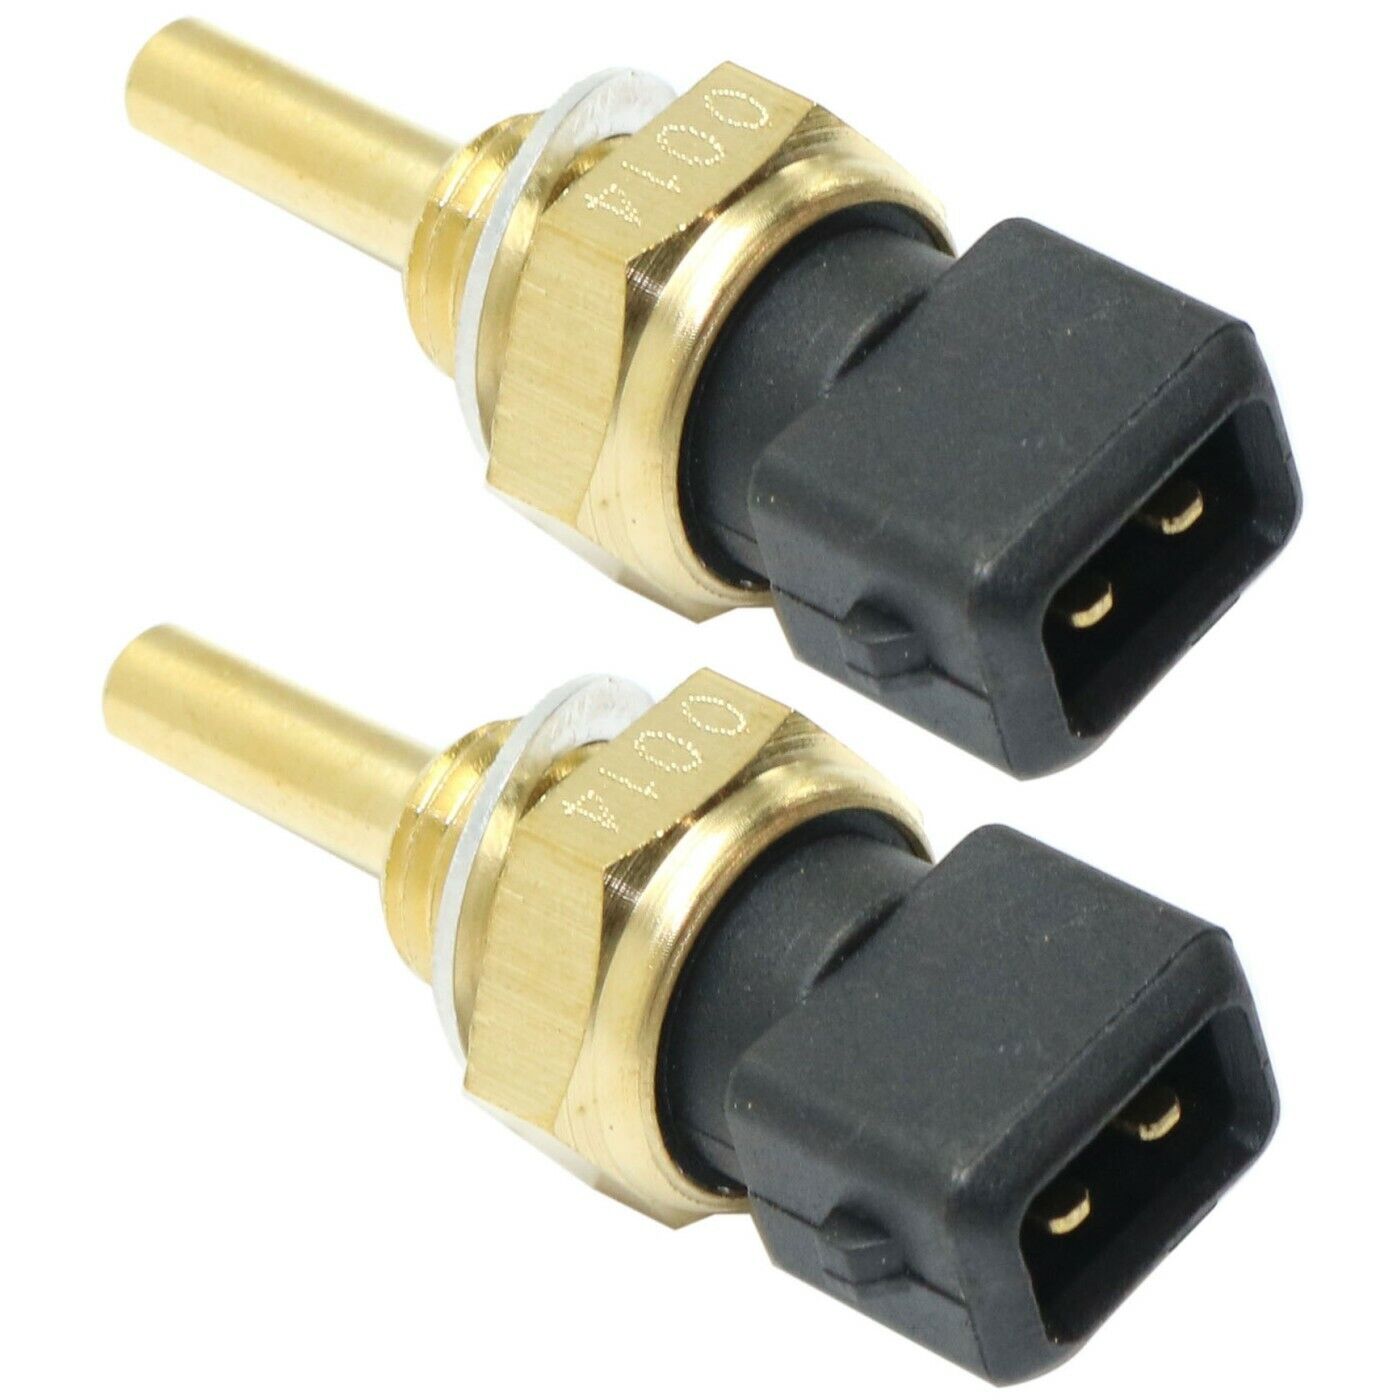 Front Coolant Temperature Sensors Set of 2 Pair for Chevy VW BMW Toyota Volvo